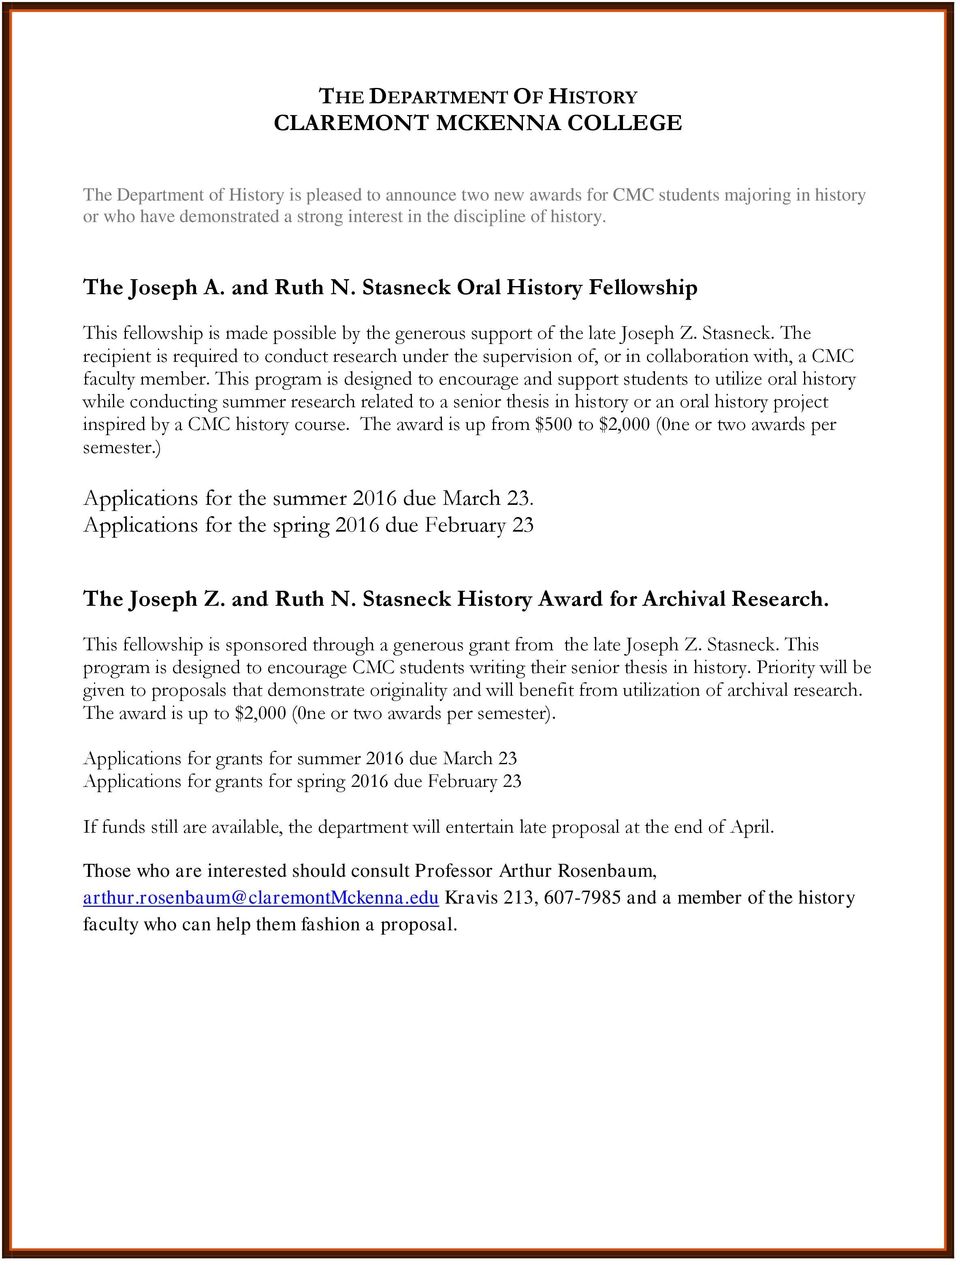 This program is designed to encourage and support students to utilize oral history while conducting summer research related to a senior thesis in history or an oral history project inspired by a CMC